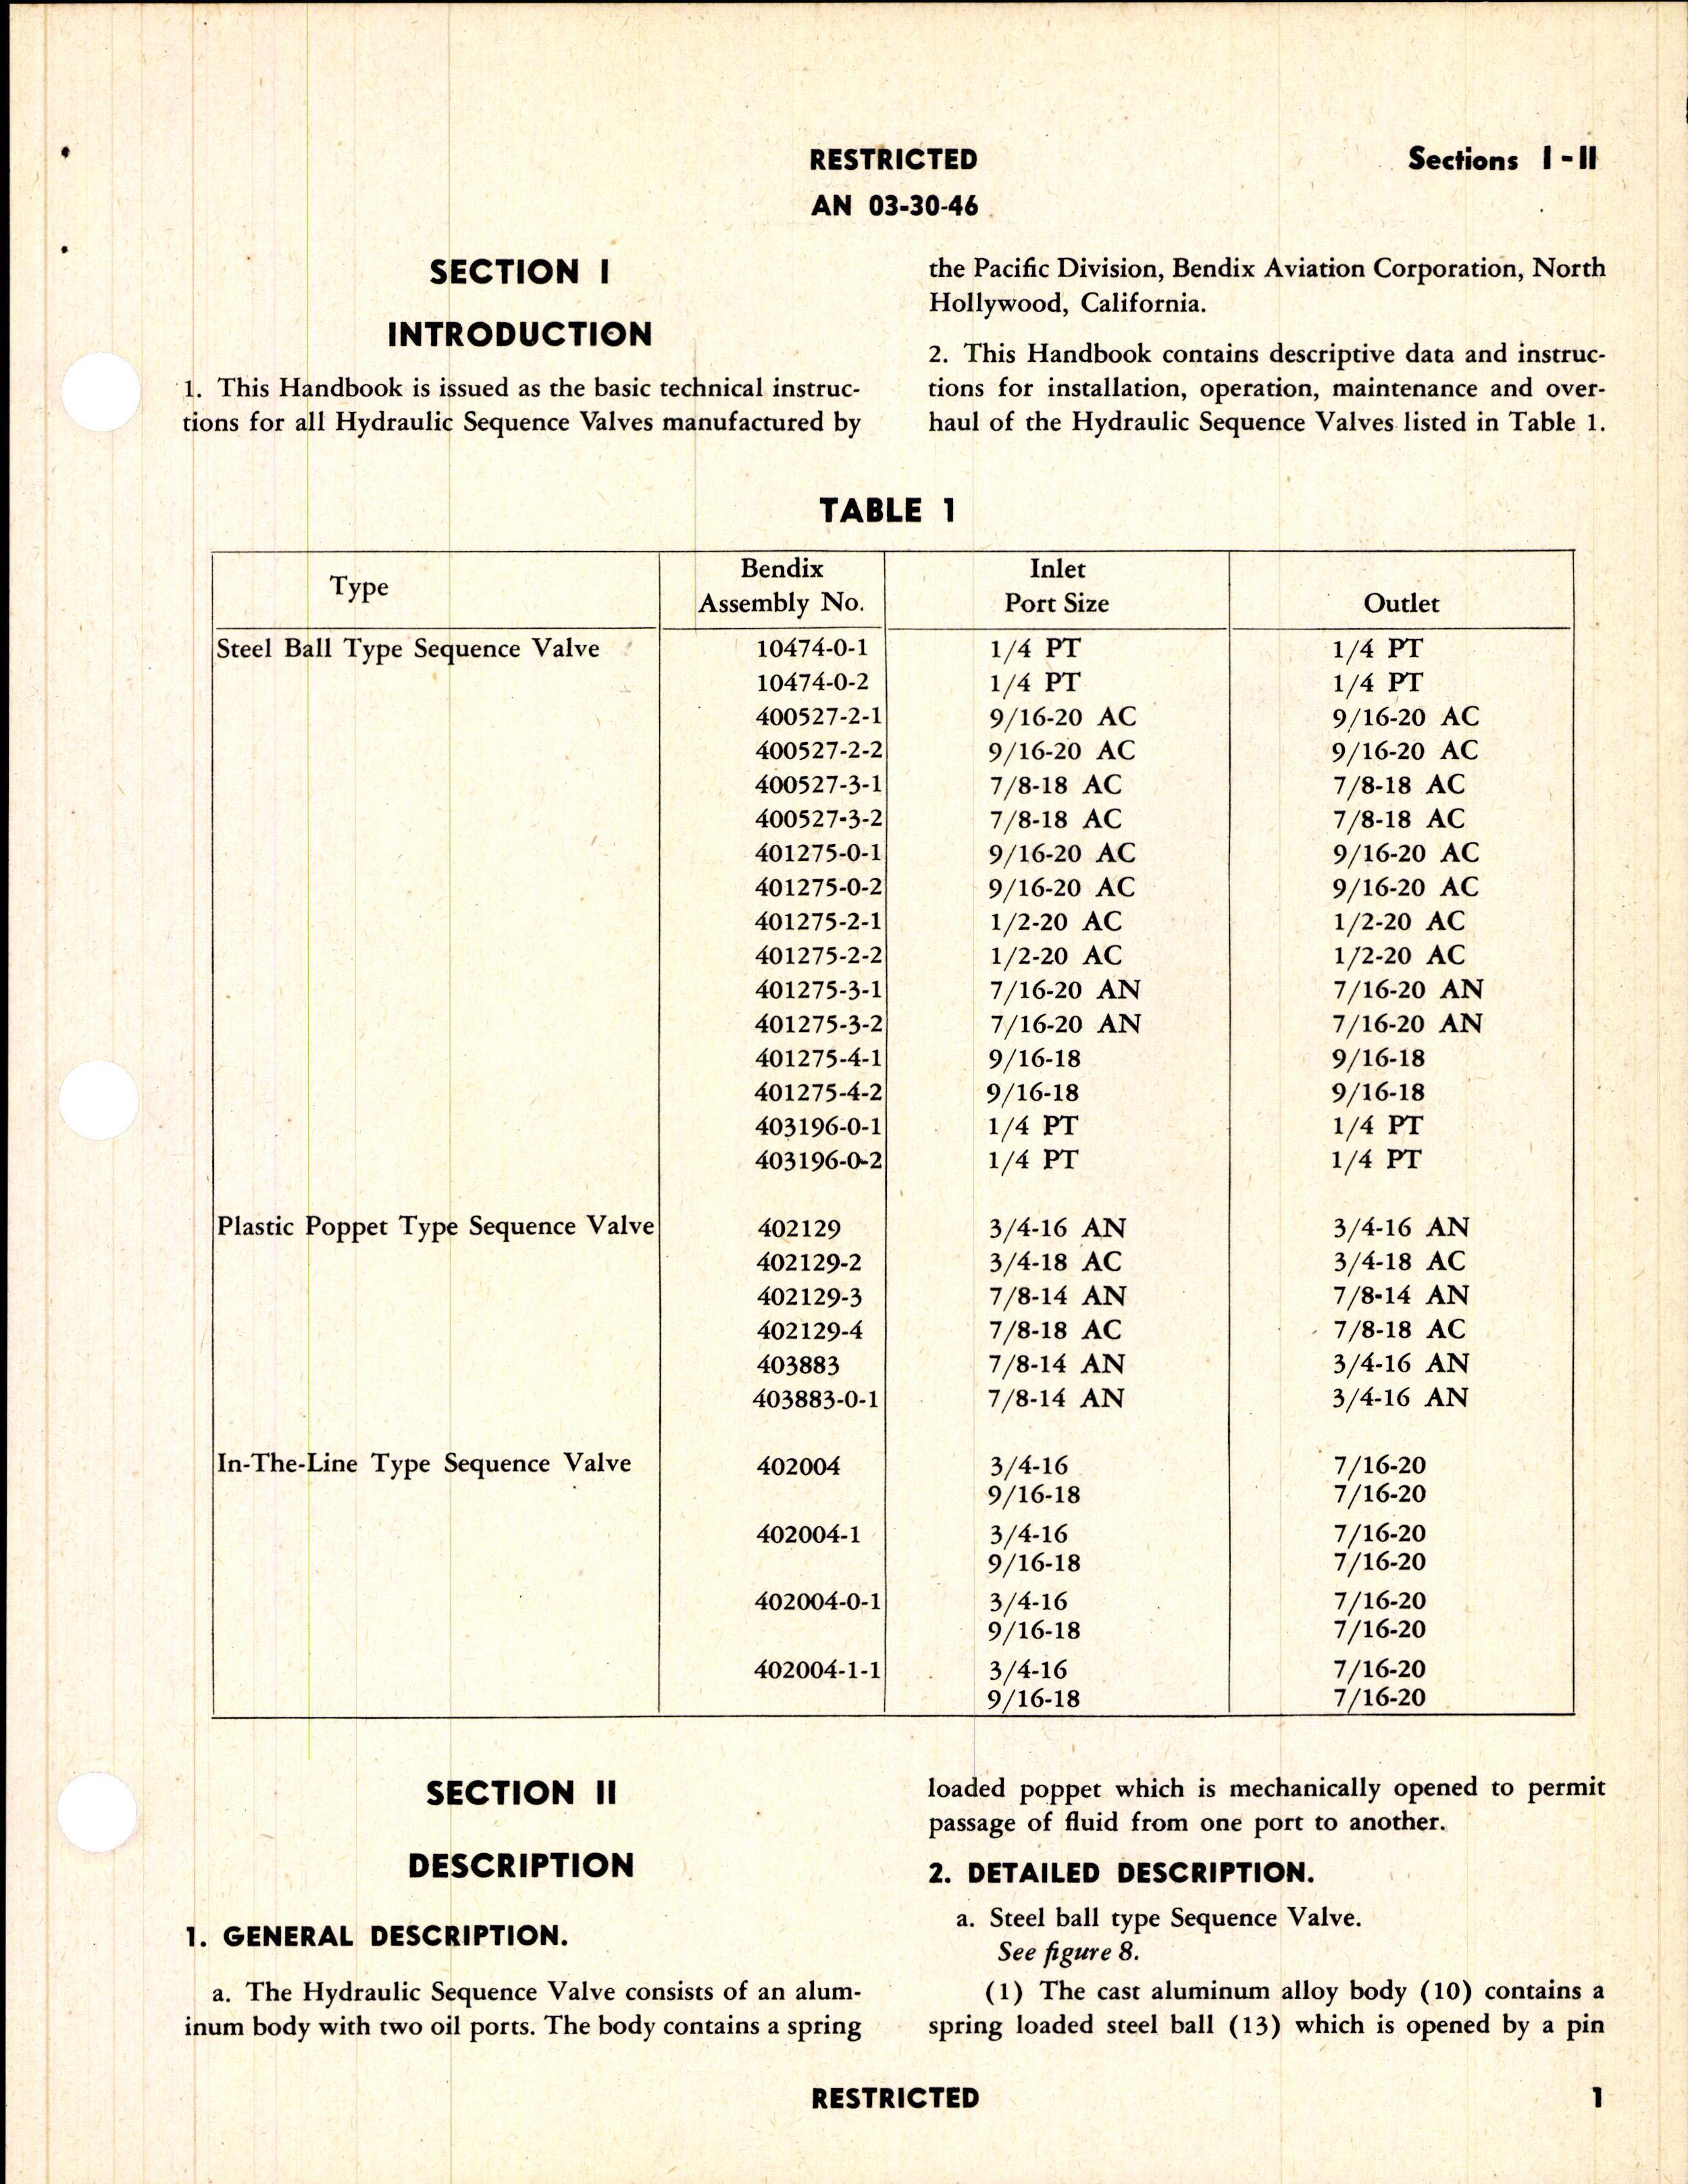 Sample page 5 from AirCorps Library document: Handbook of Instructions with Parts Catalog for Hydraulic Sequence Valves